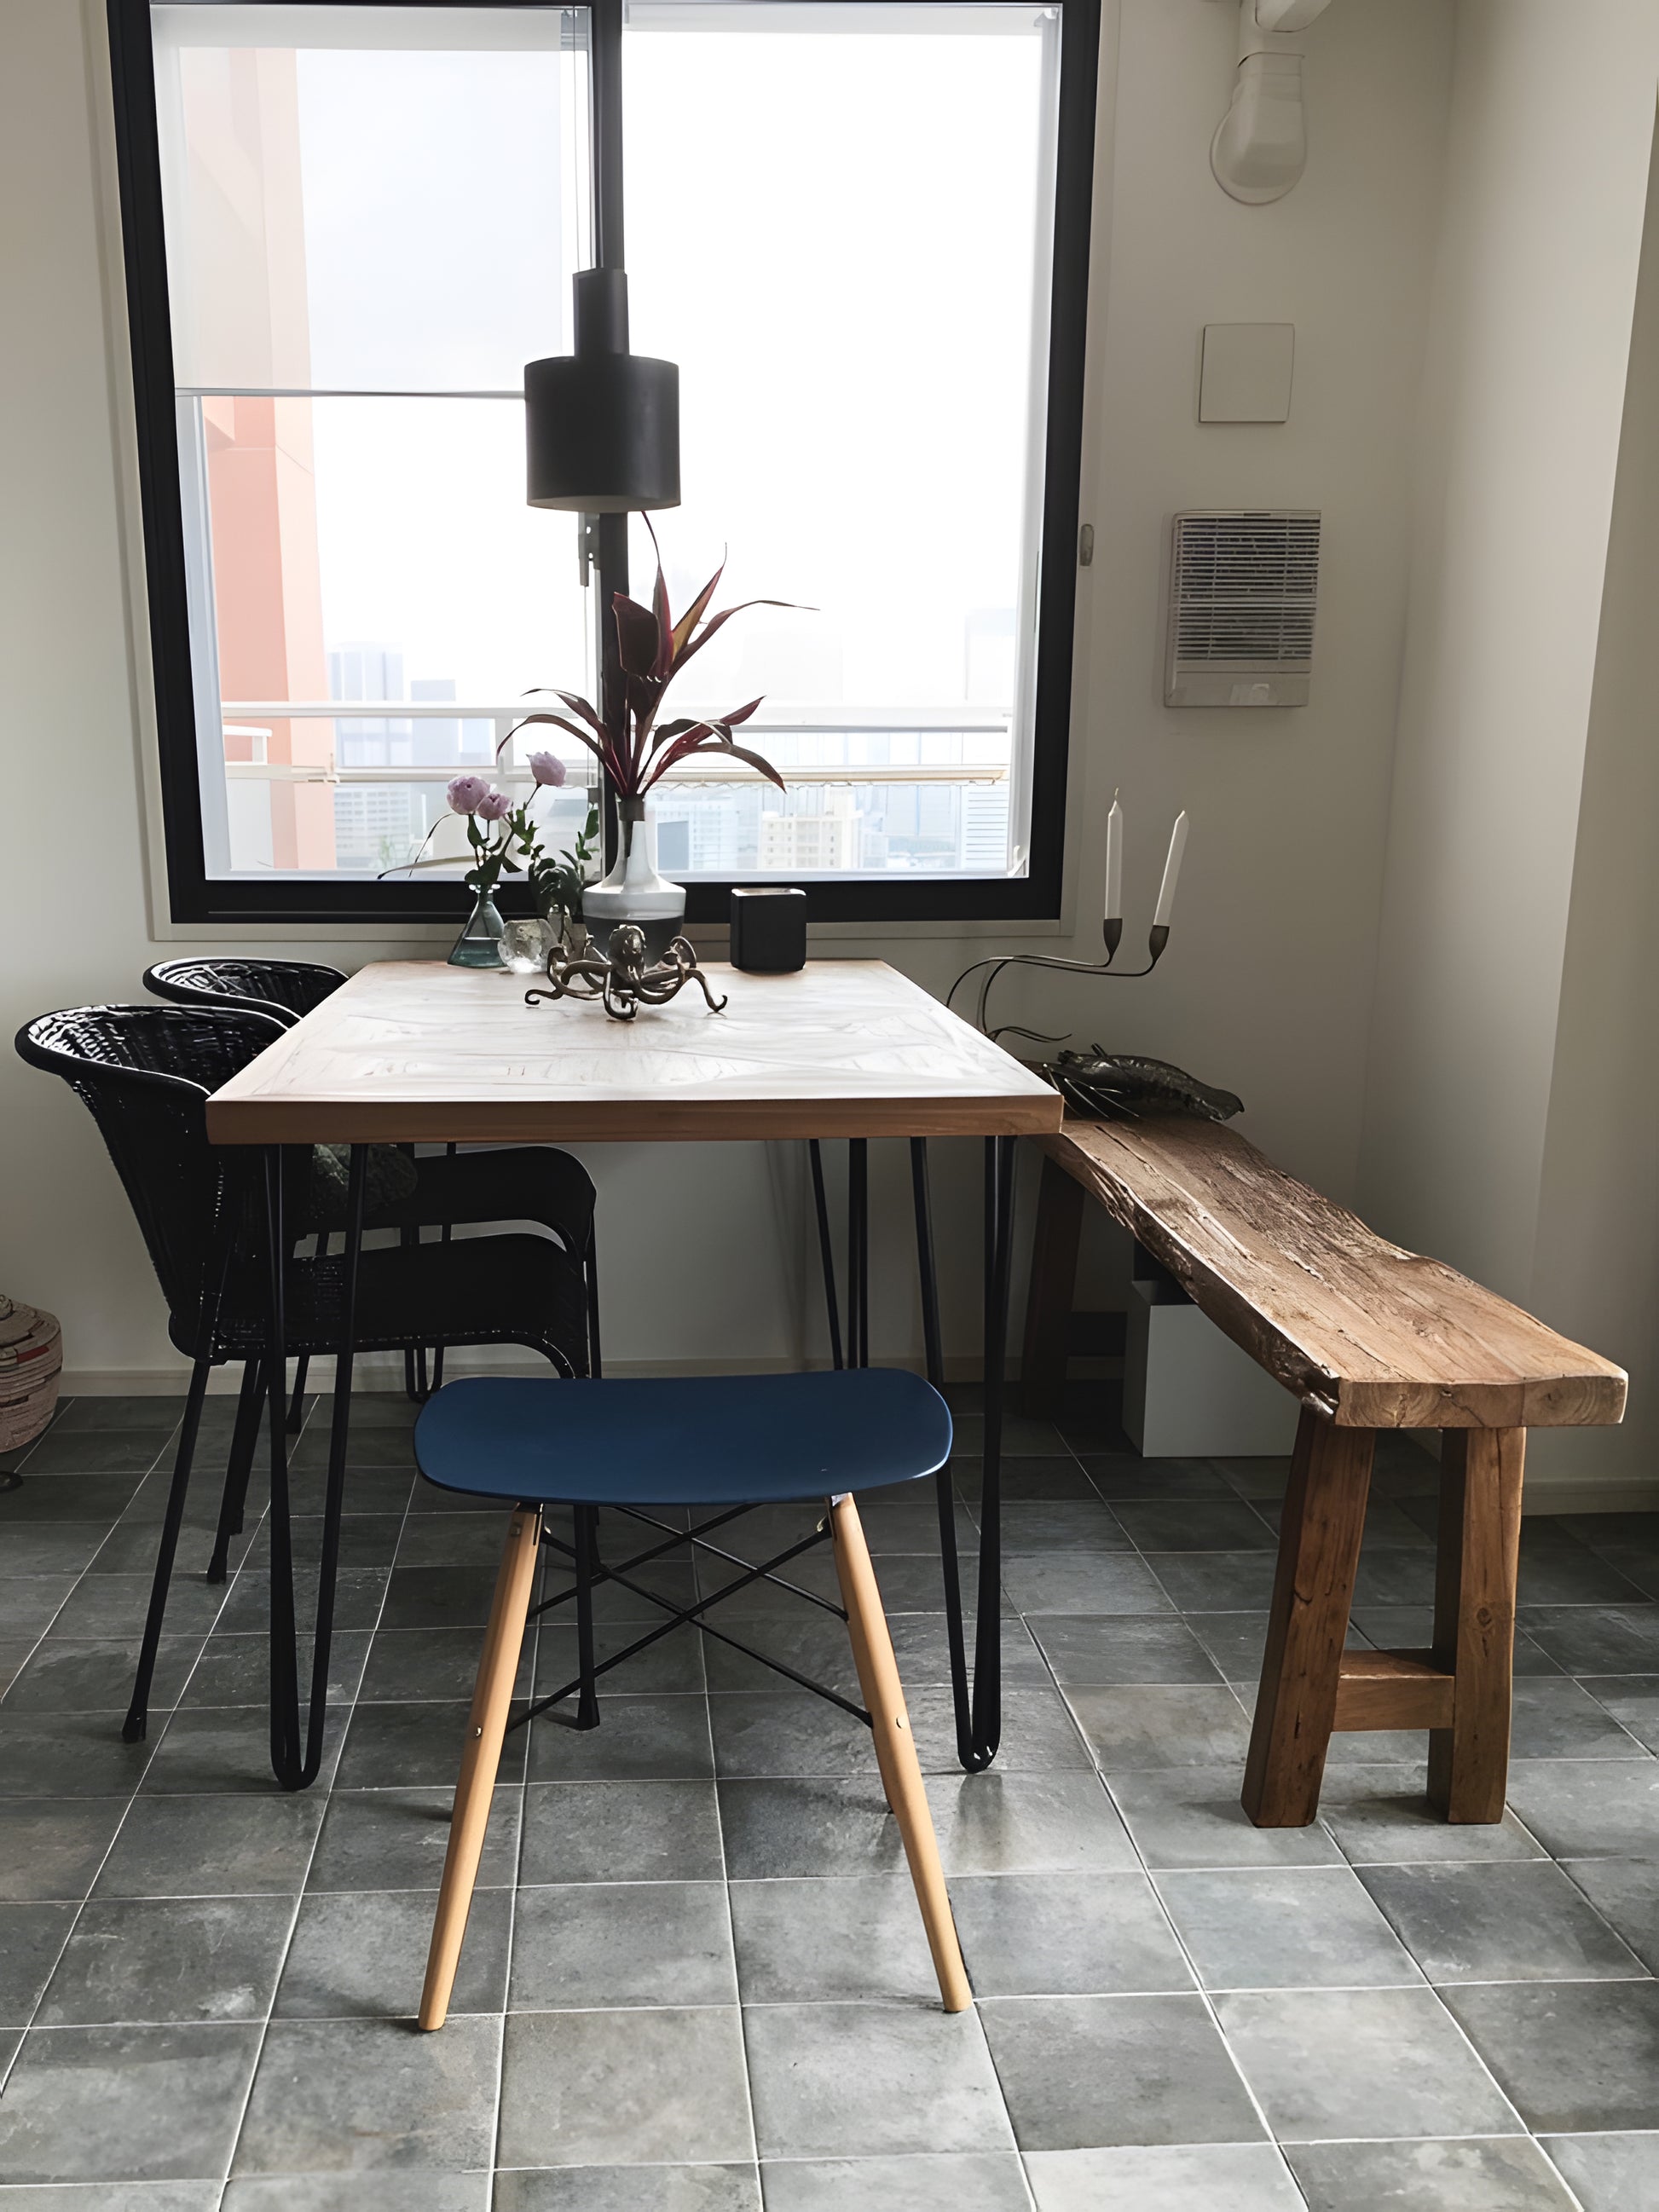 Segovia Reclaimed Teakwood Small Dining Table and Capri Reclaimed Teakwood Dining Bench with black hairpin legs and Capri reclaimed teak wooden bench in small dining room setting by Mellowdays Furniture